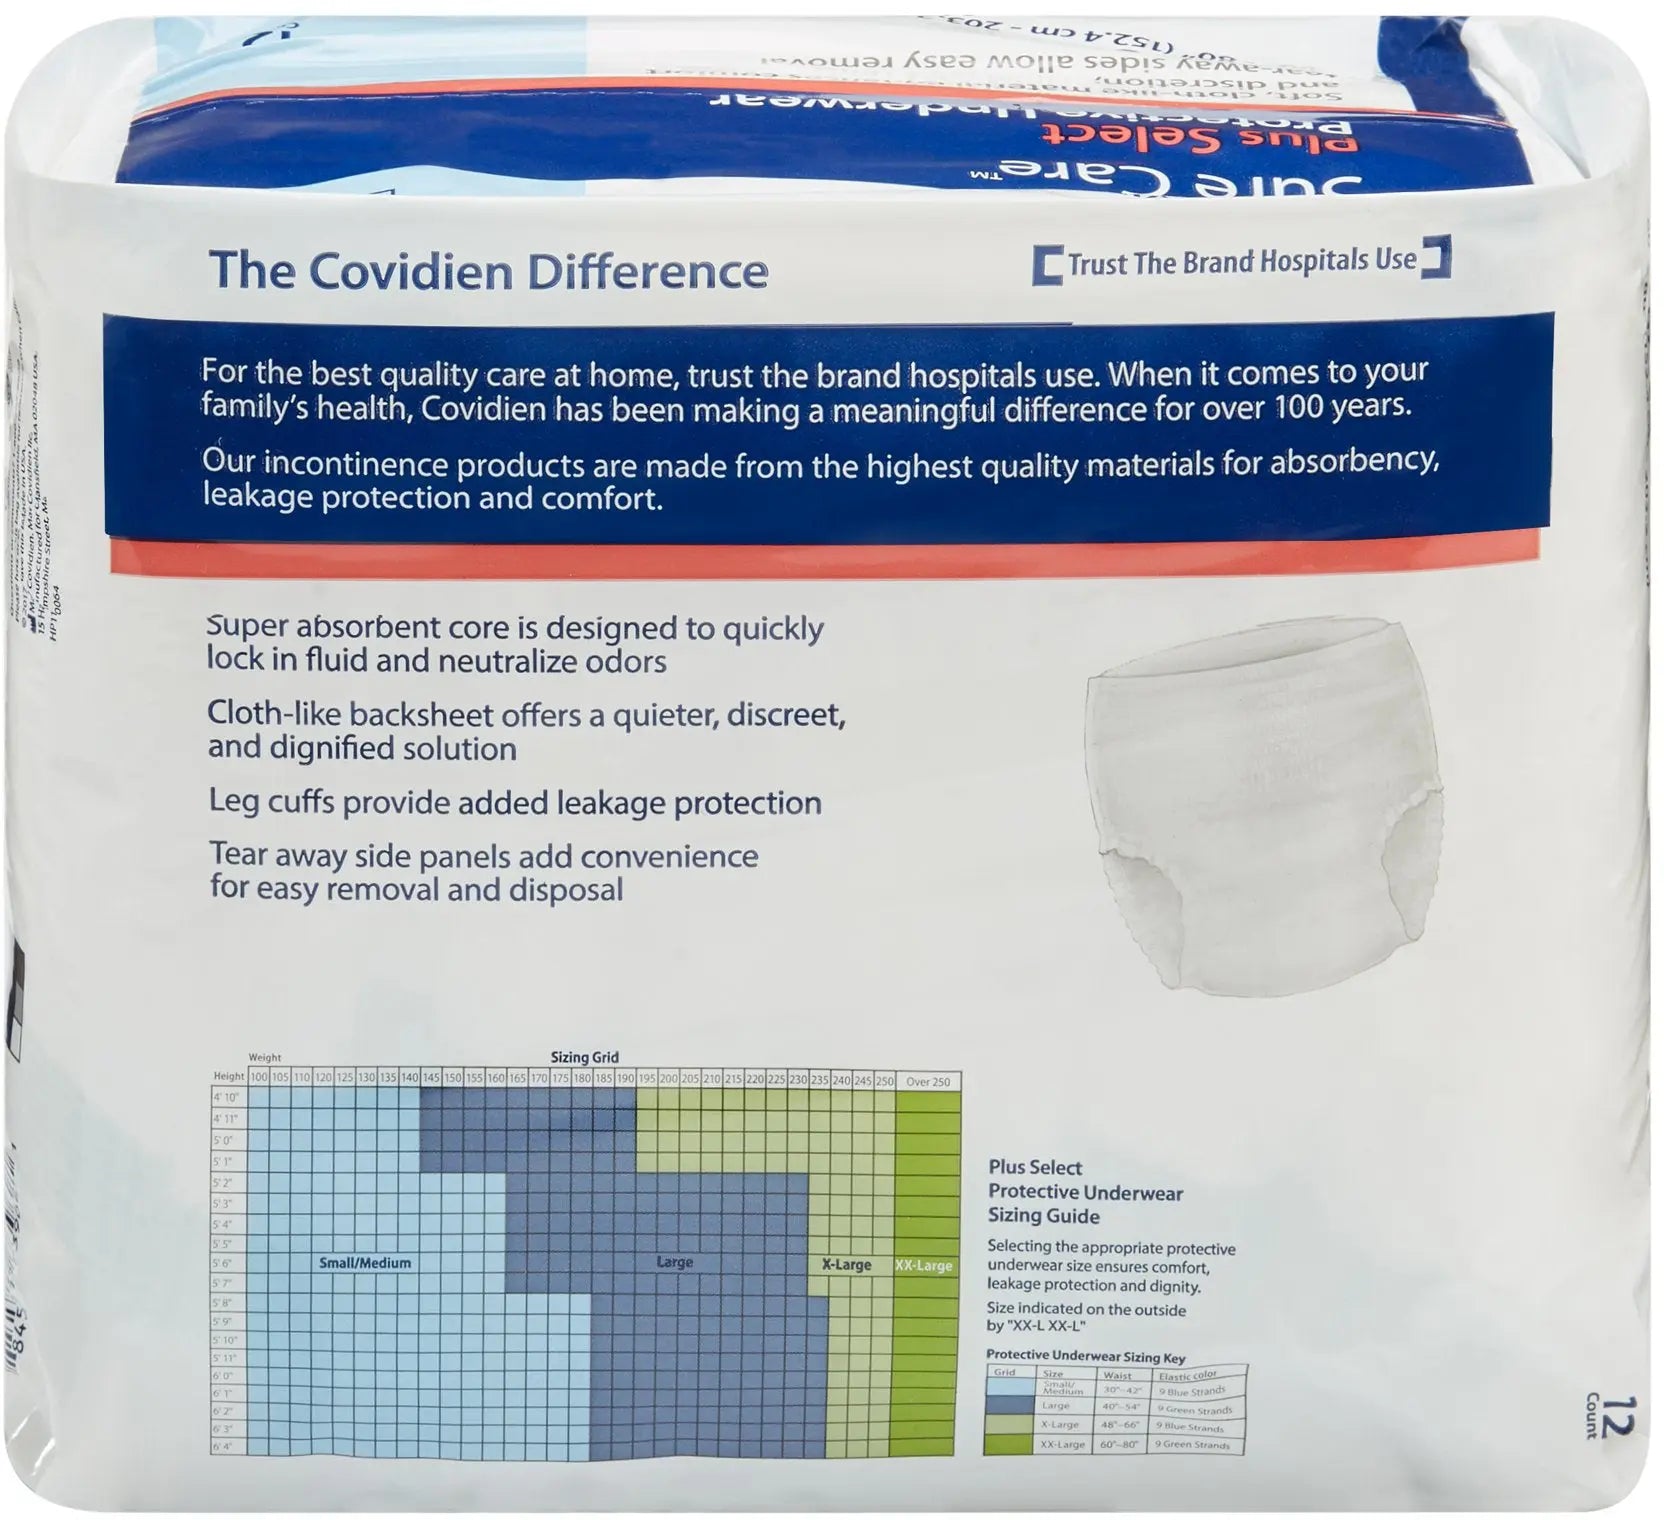 Sure Care Plus Protective Underwear - WellBefore